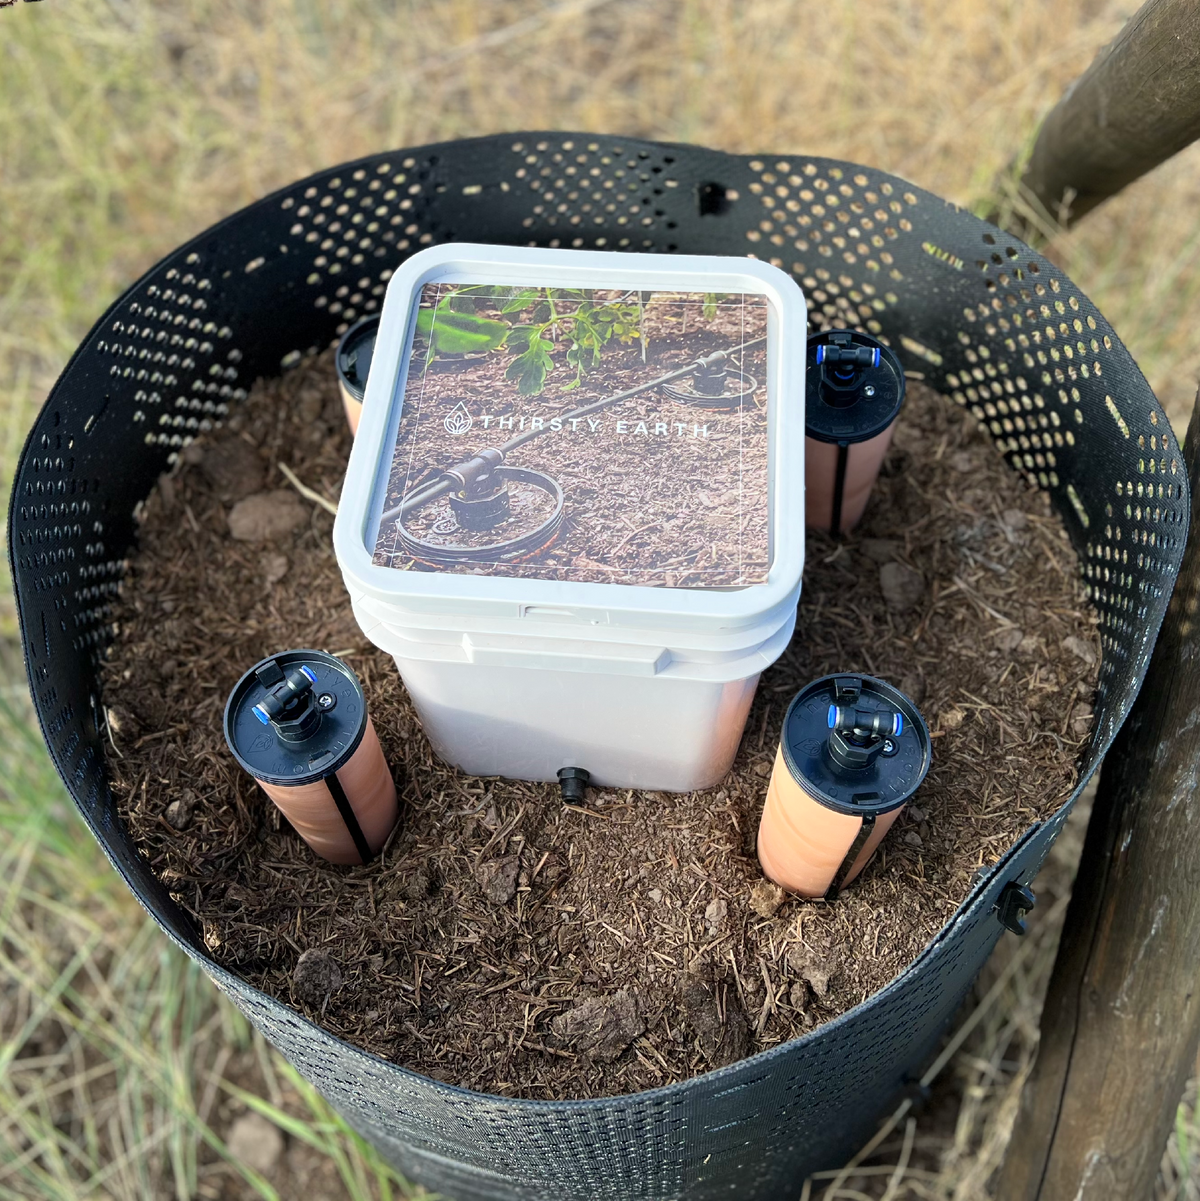 Sneak Peek Wednesday: Olla - efficient irrigation with this